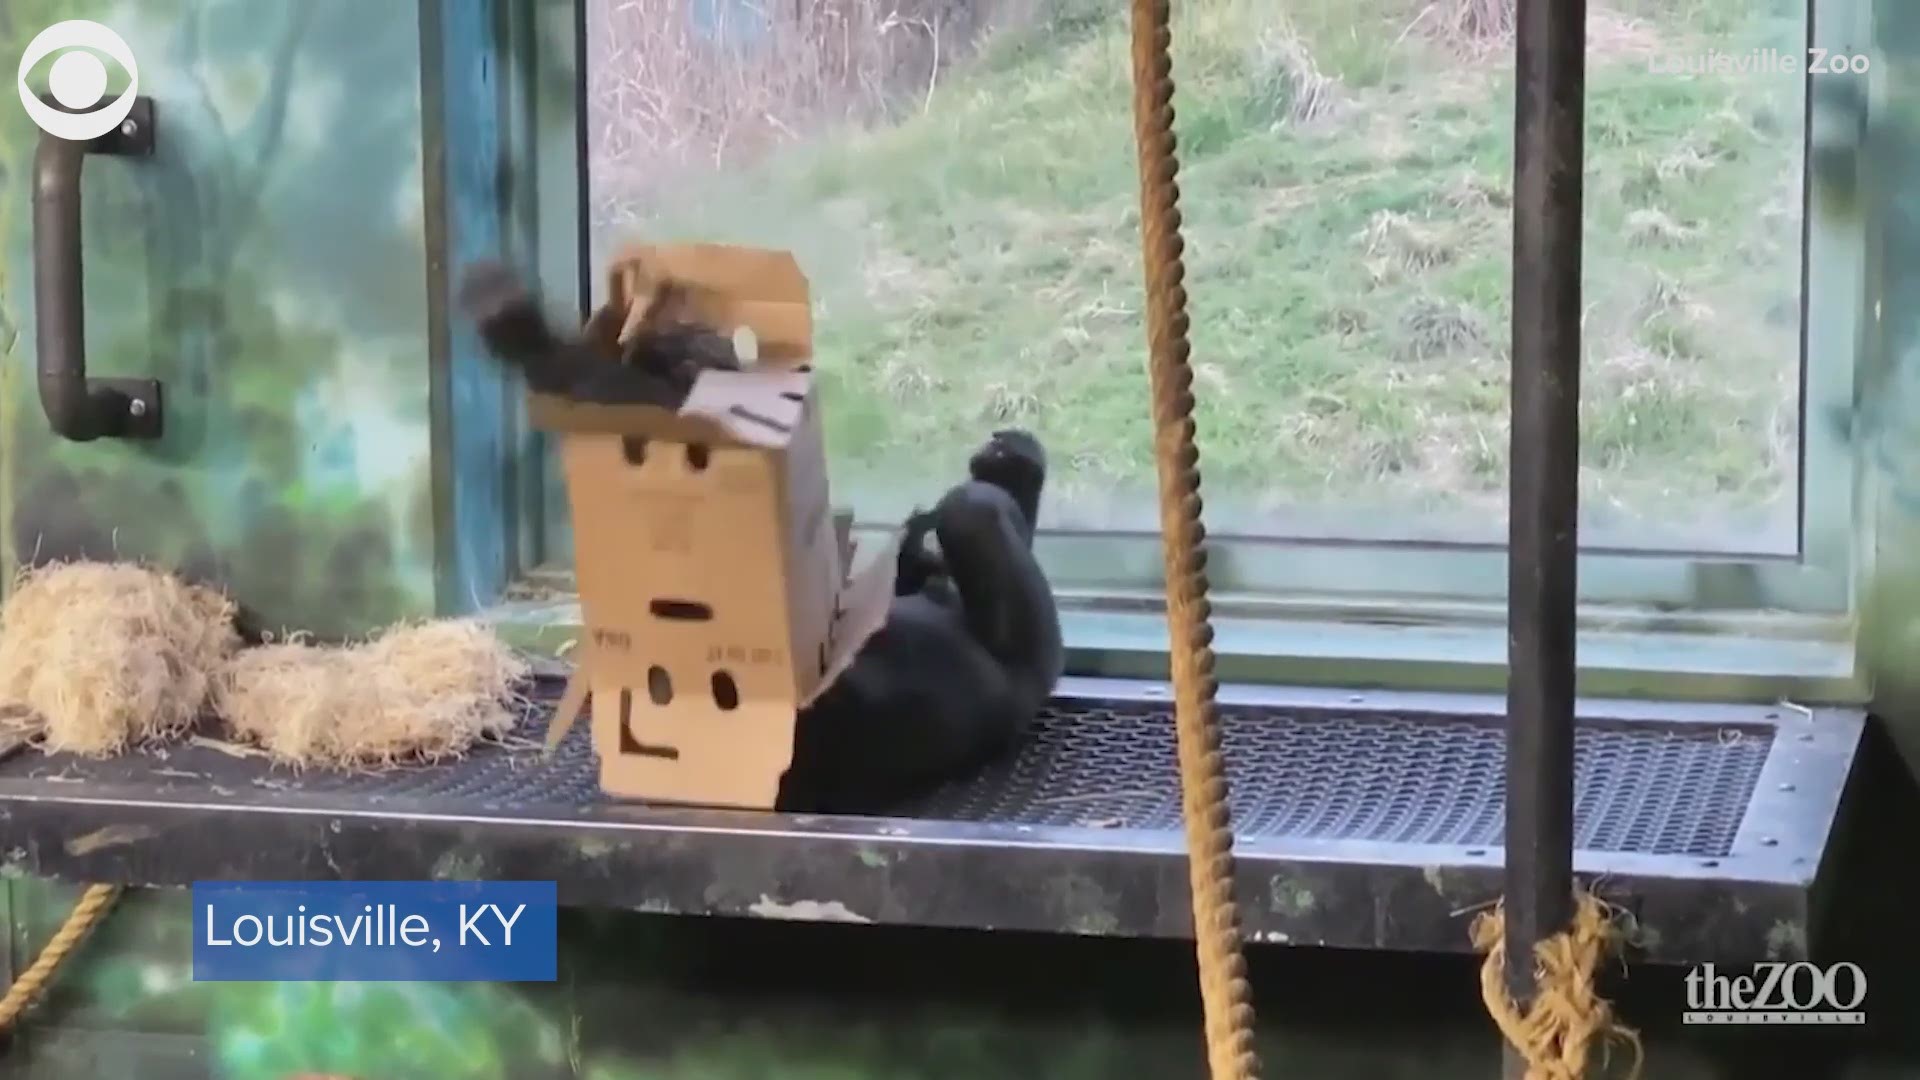 Kindi the gorilla had a great time playing with a cardboard box at the Louisville Zoo in Kentucky on April 14